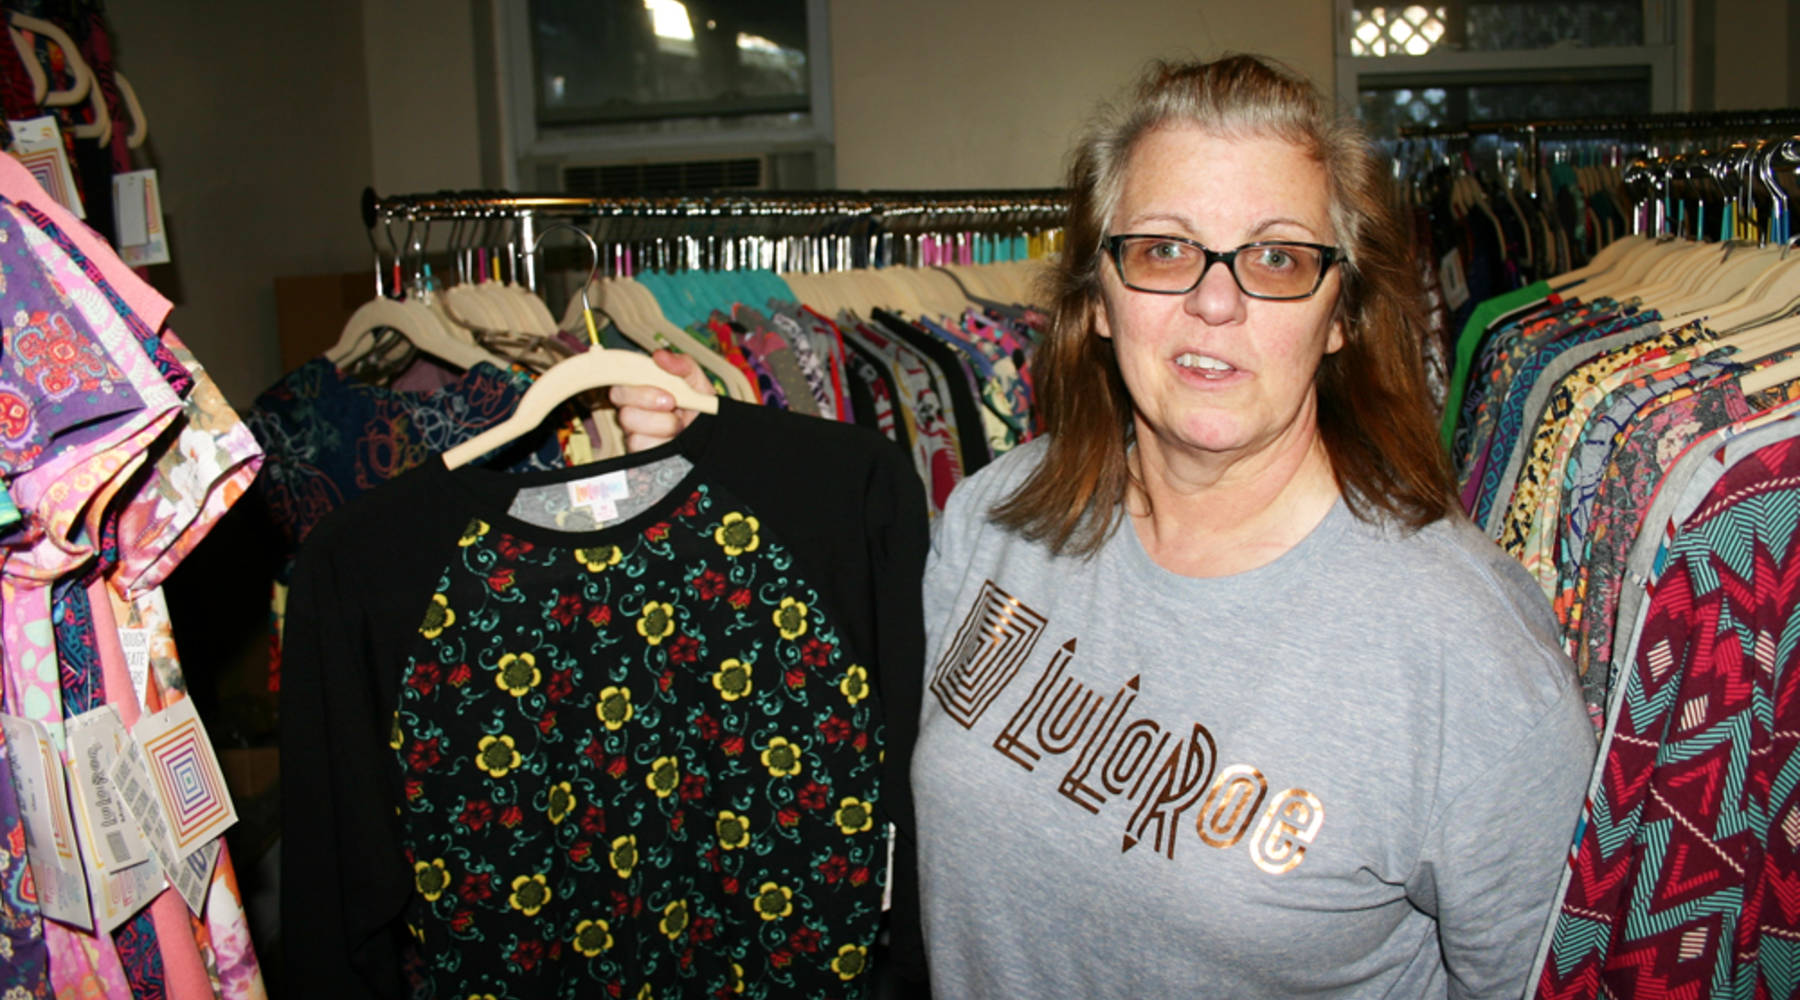 How new direct selling companies like LuLaRoe are benefiting from